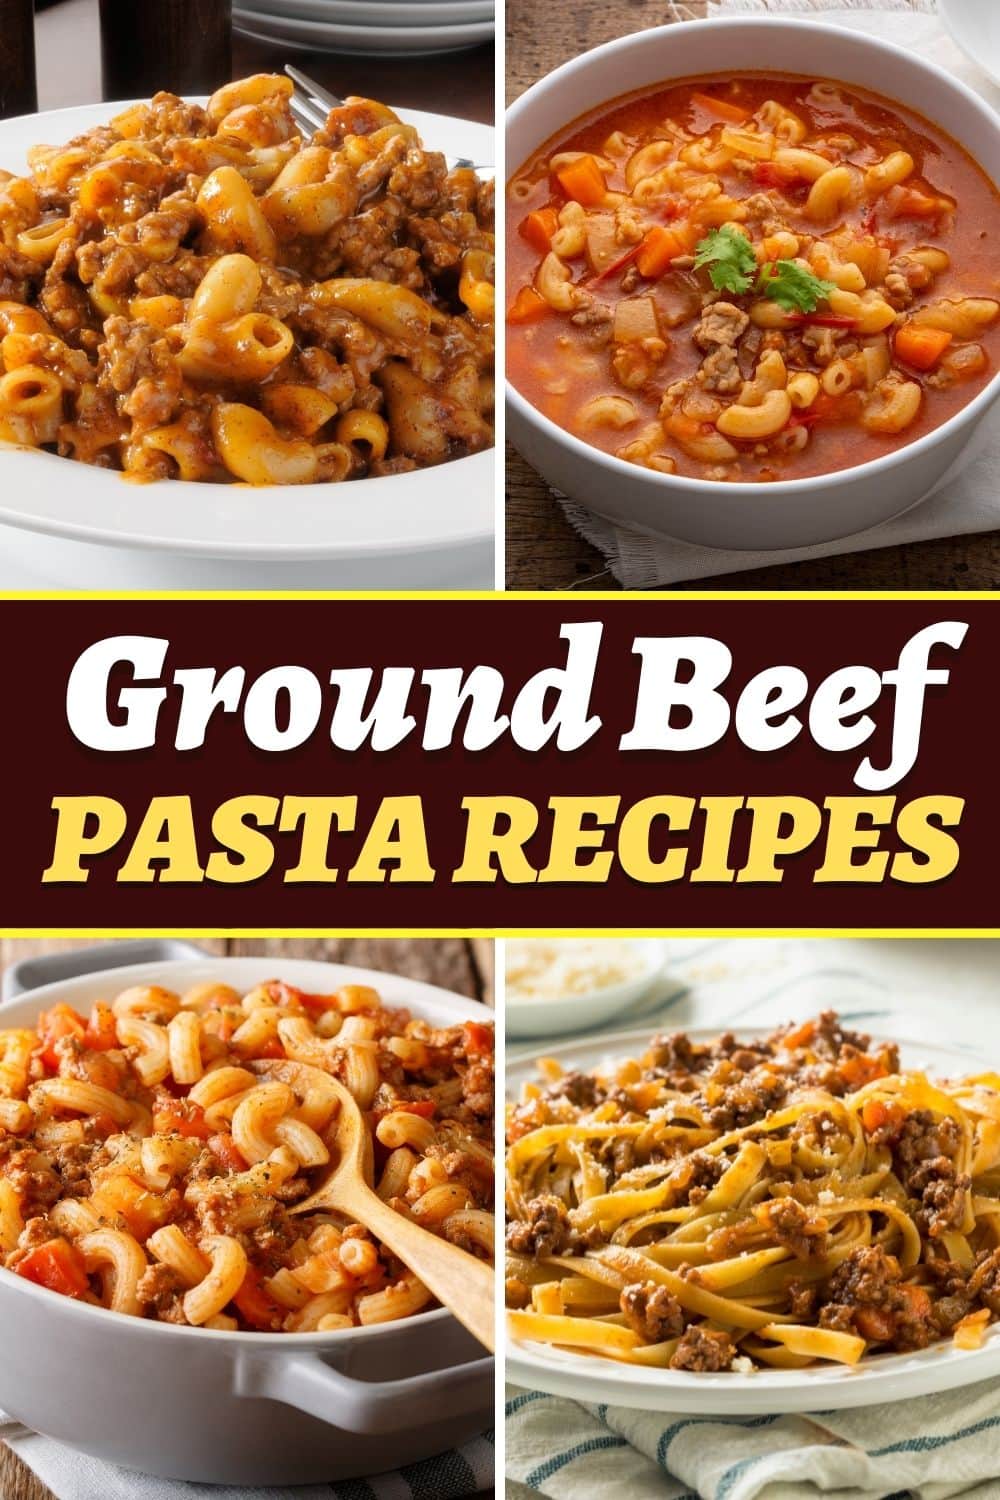 25 Best Ground Beef Pasta Recipes to Try Tonight - Insanely Good